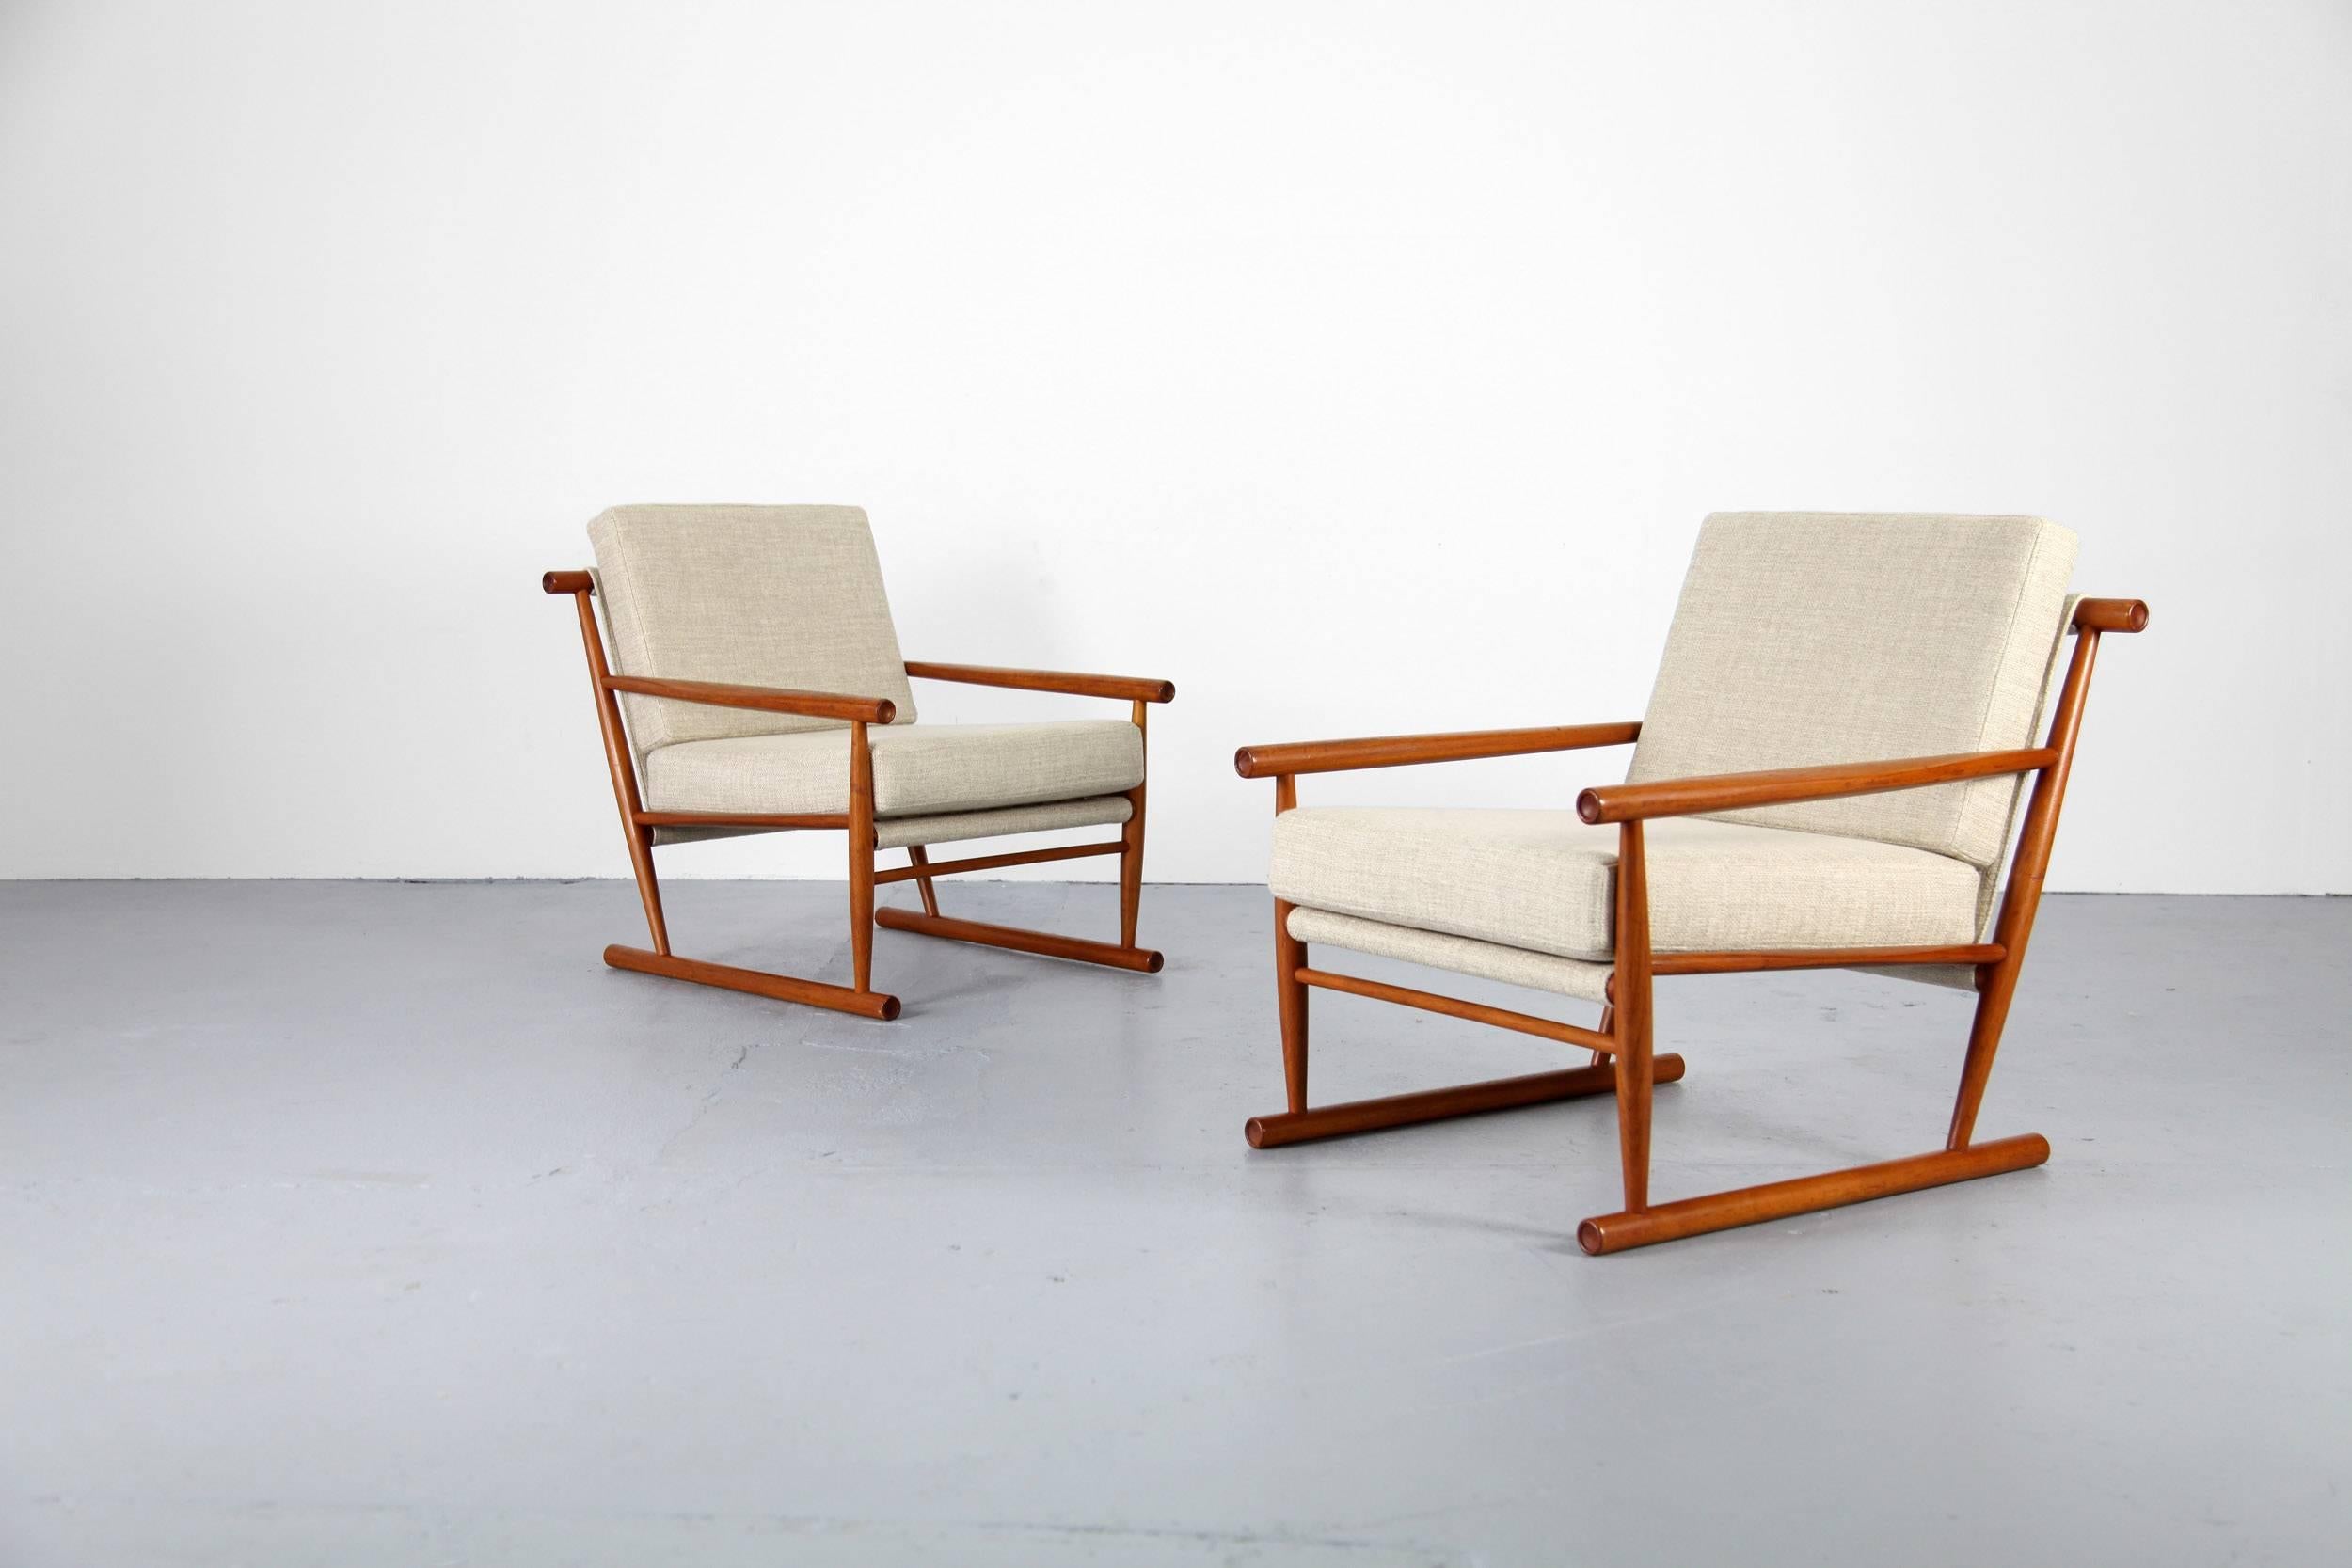 Set of two beautifully constructed sled easy chairsfrom the 1960s. The chairs show sophisticated design and workmanship. The upholstery is new and has been done with a high quality fabric. Both chairs are in great condition.

 